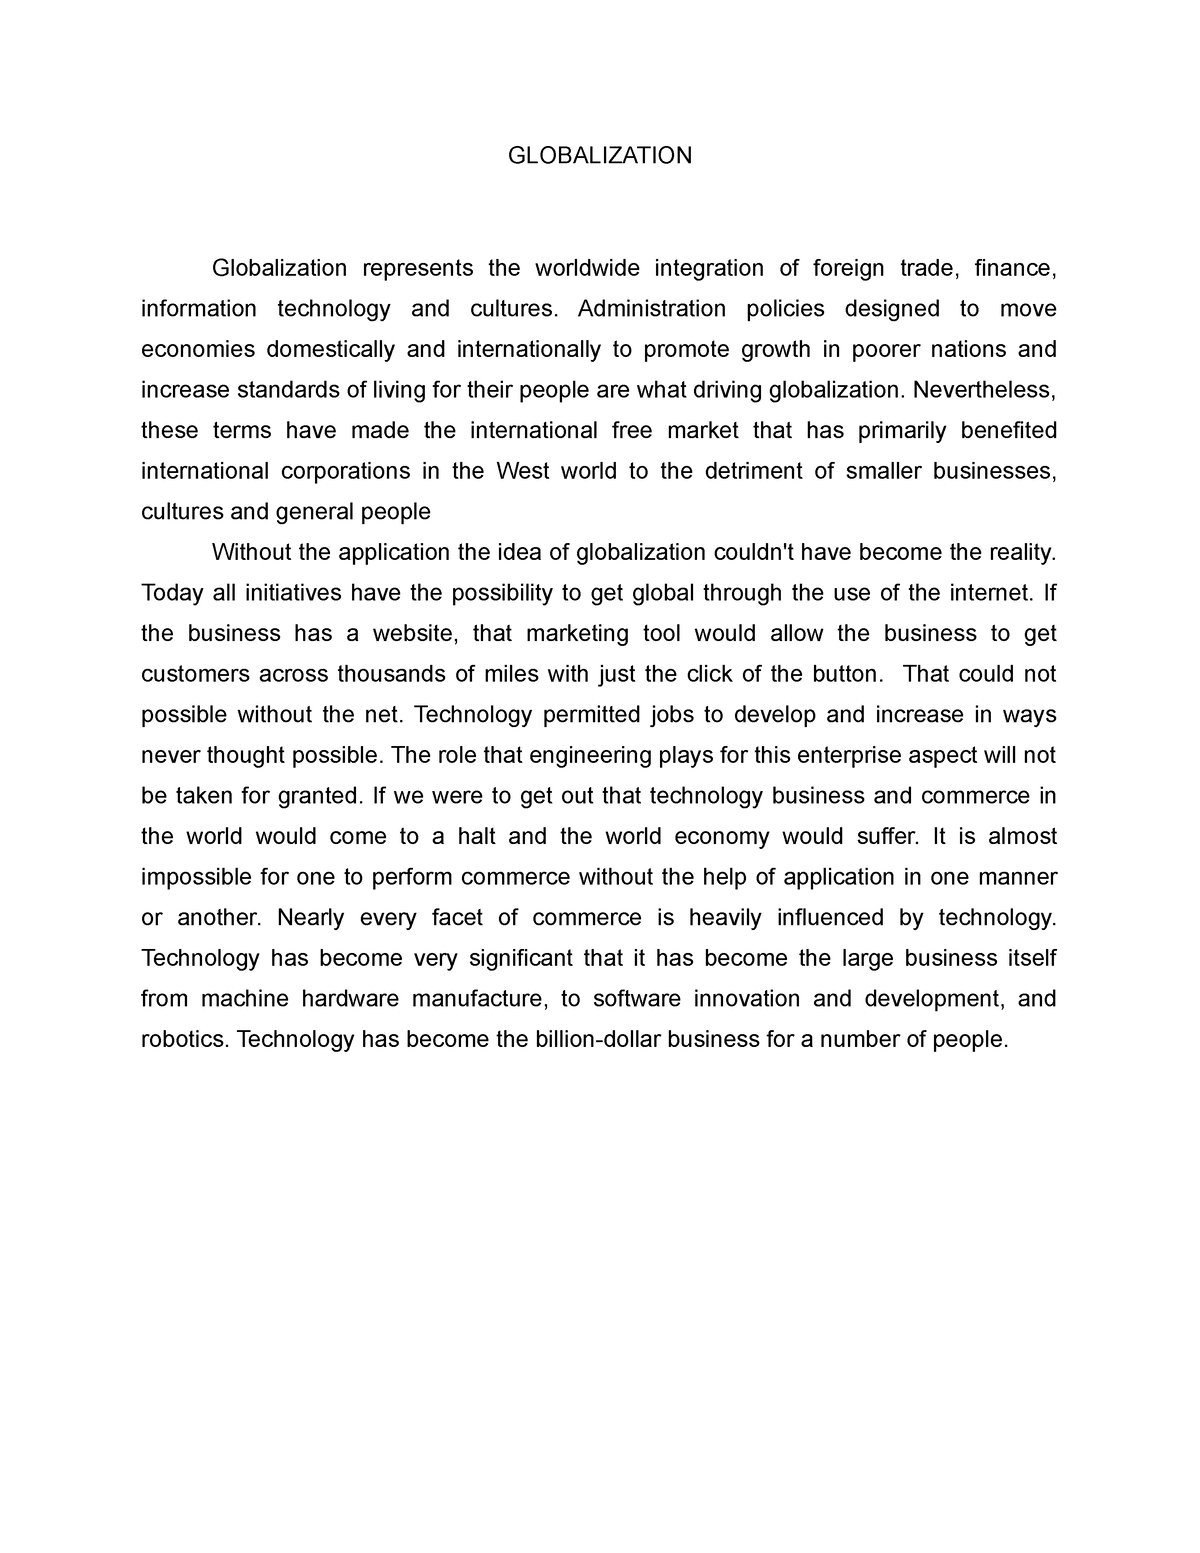 media and globalization in contemporary world essay